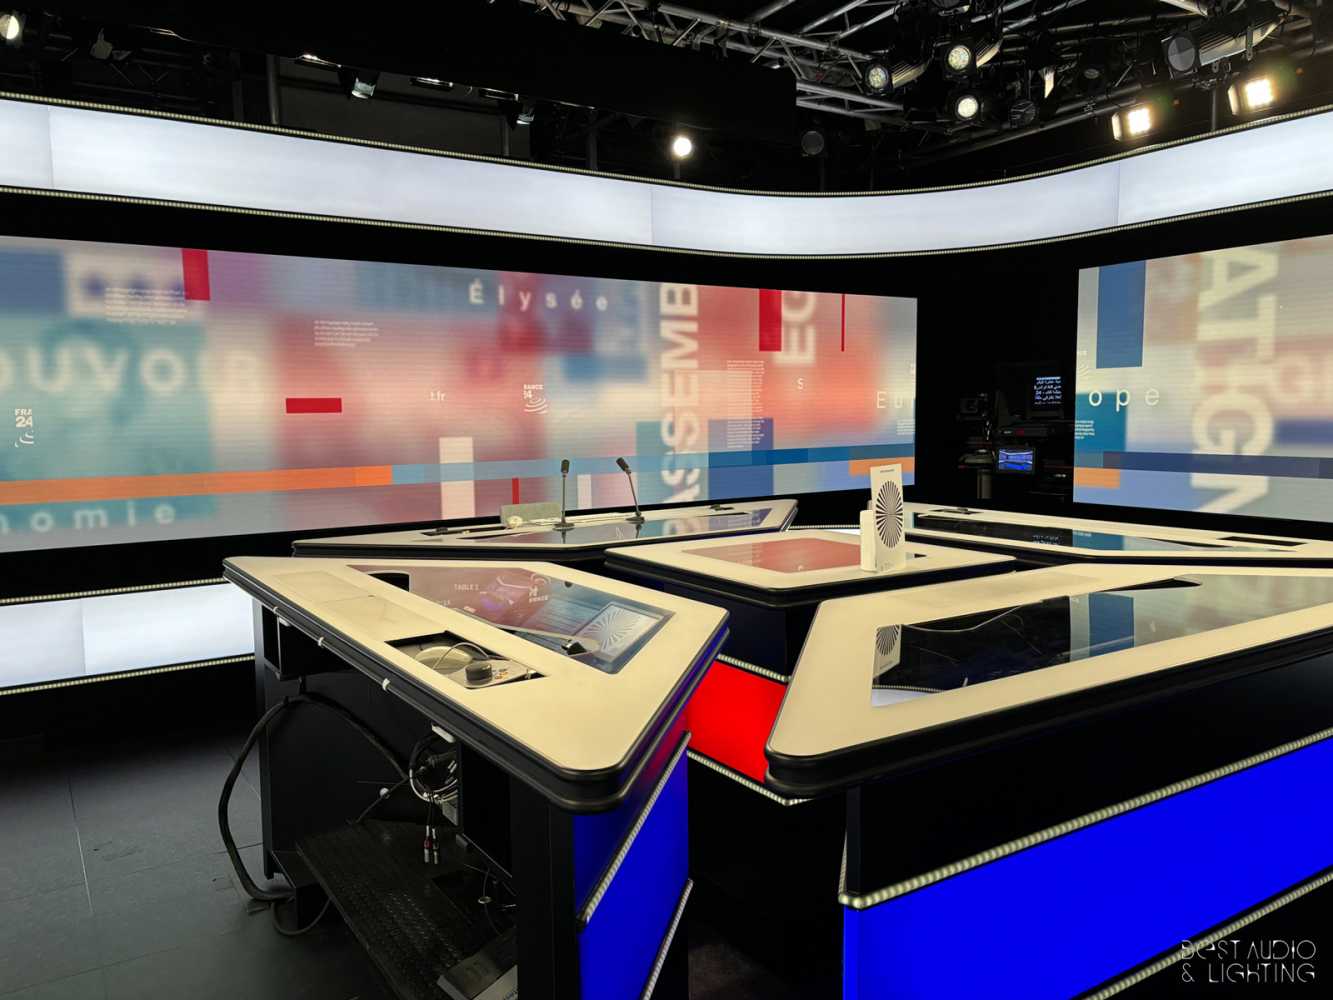 France 24 studios make the most of limited space